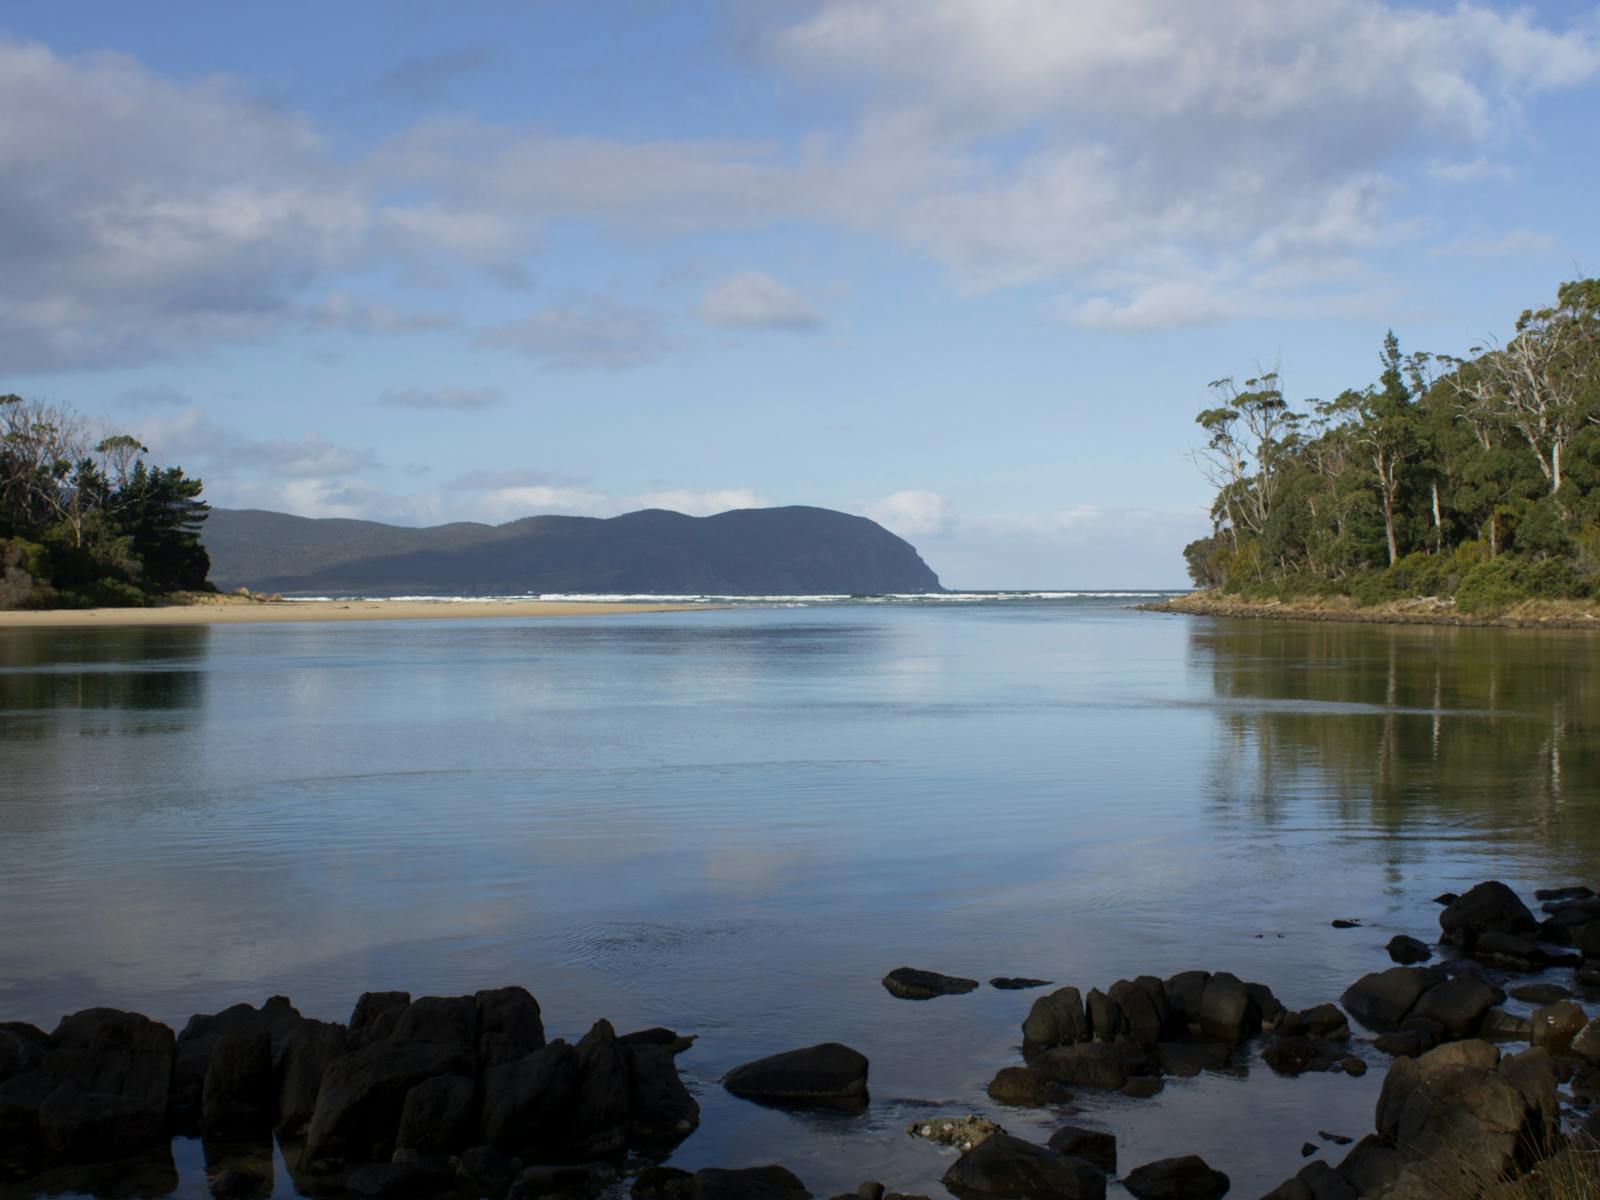 Let Adventure Trails Tasmania guide you to some idyllic and uncrowded spots, like this cove on Bruny